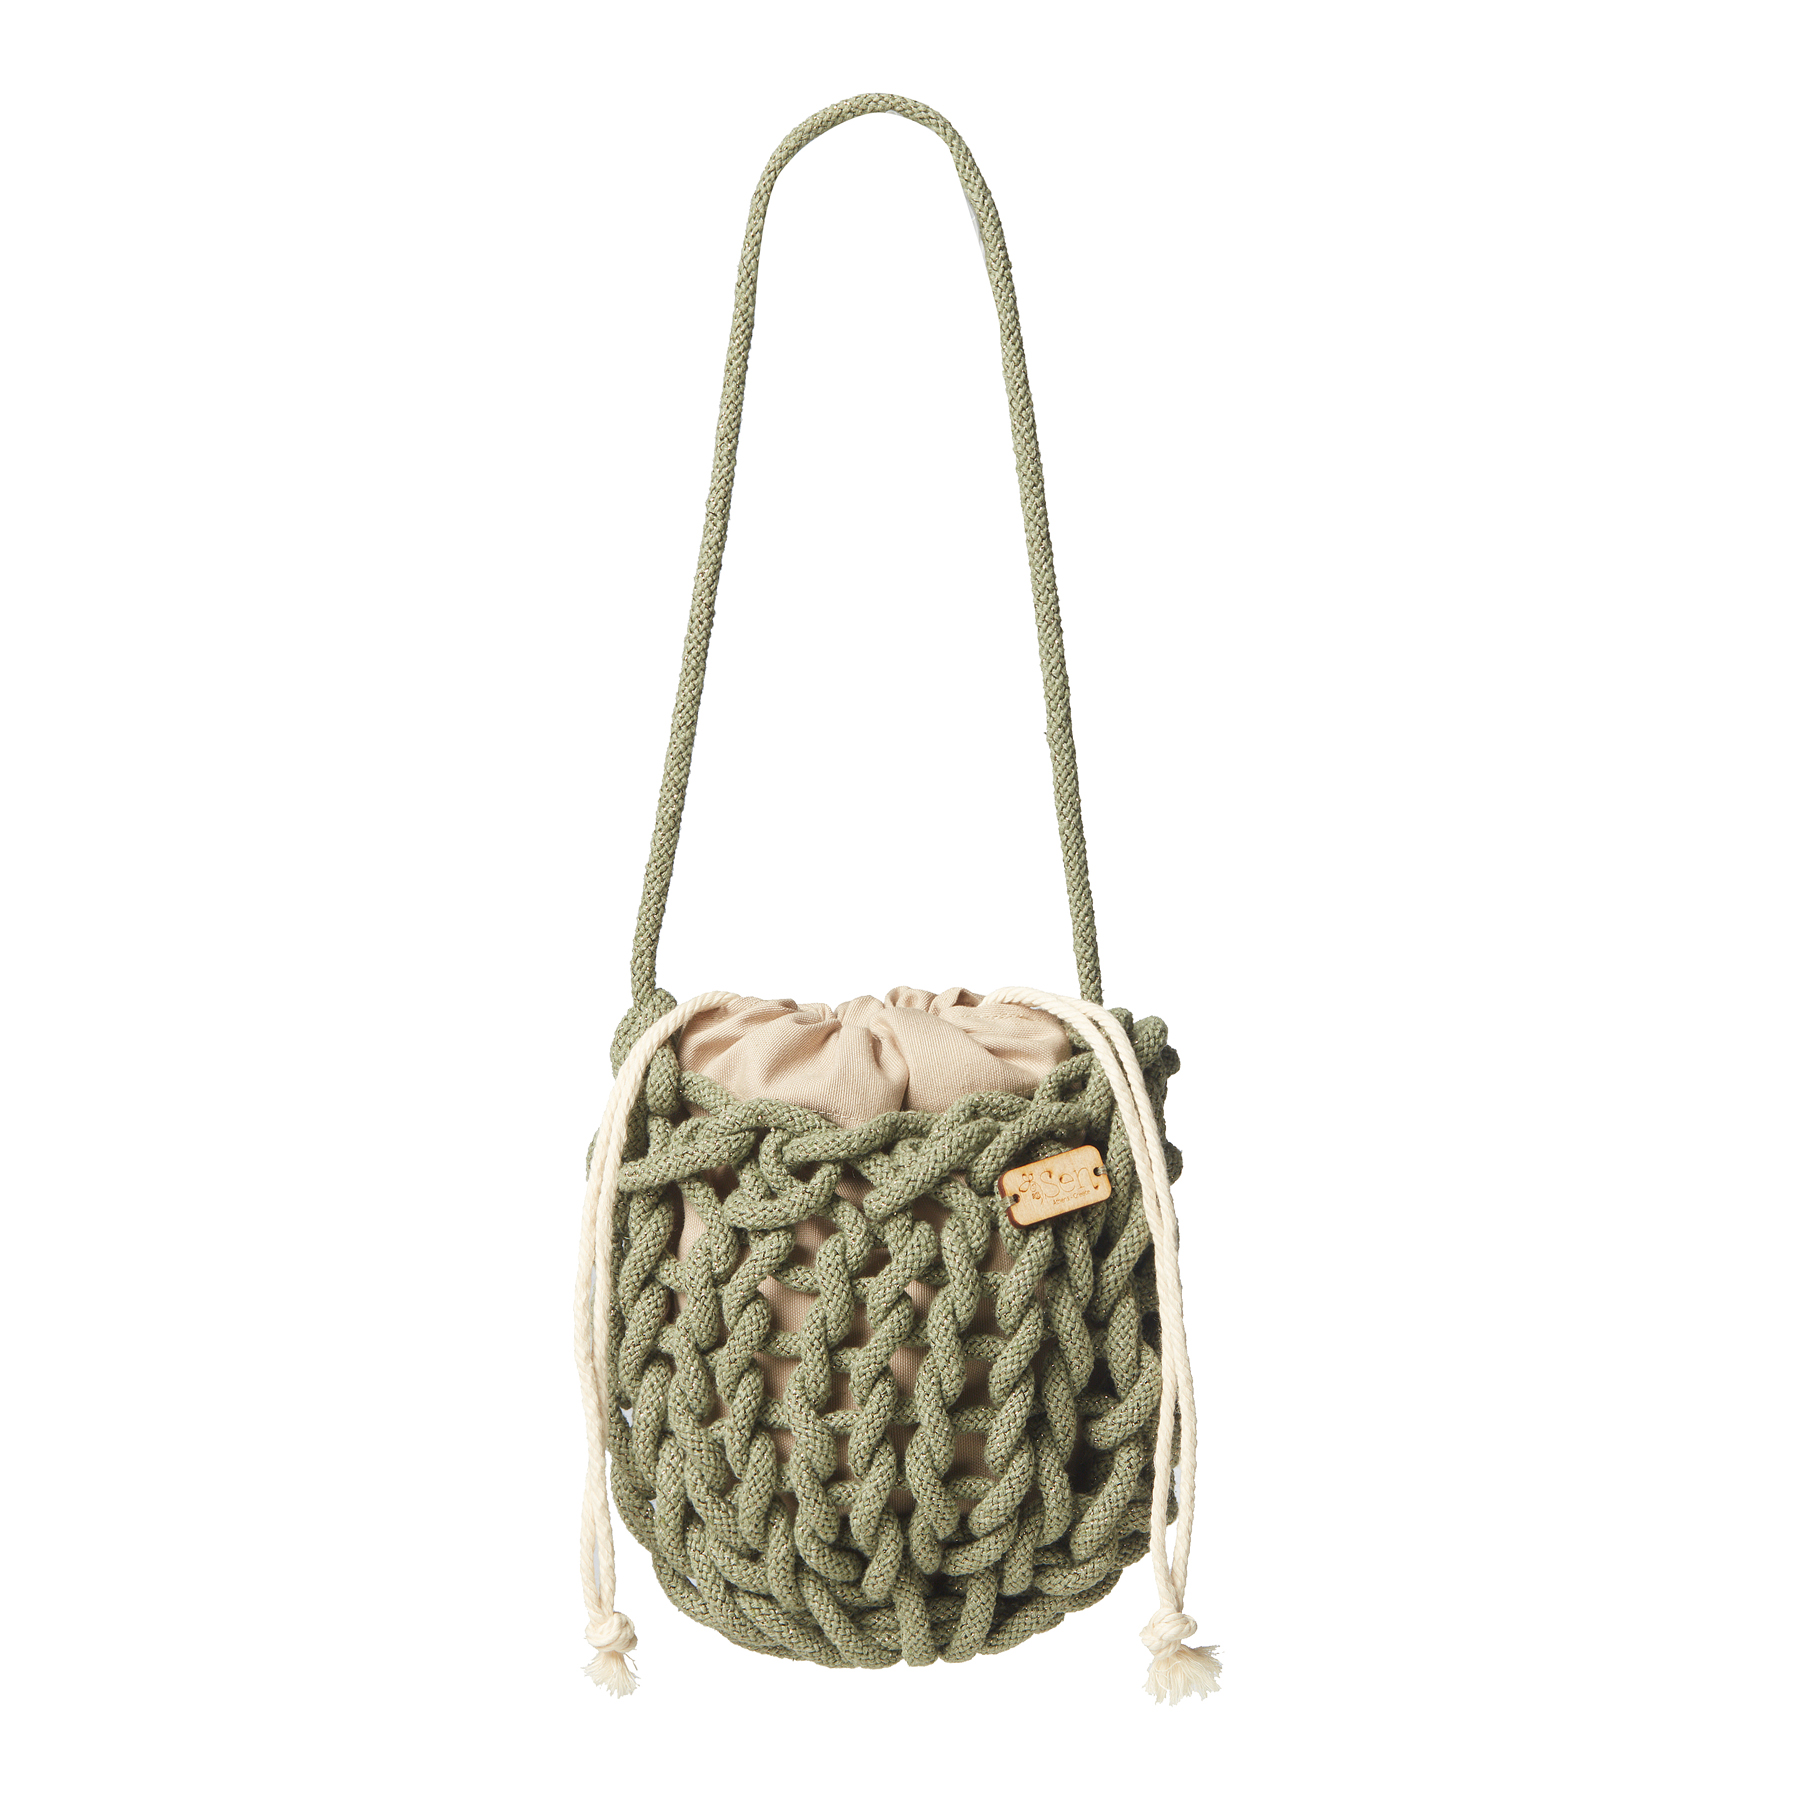 a handmade knitted wristed bag in metallic dark mint color